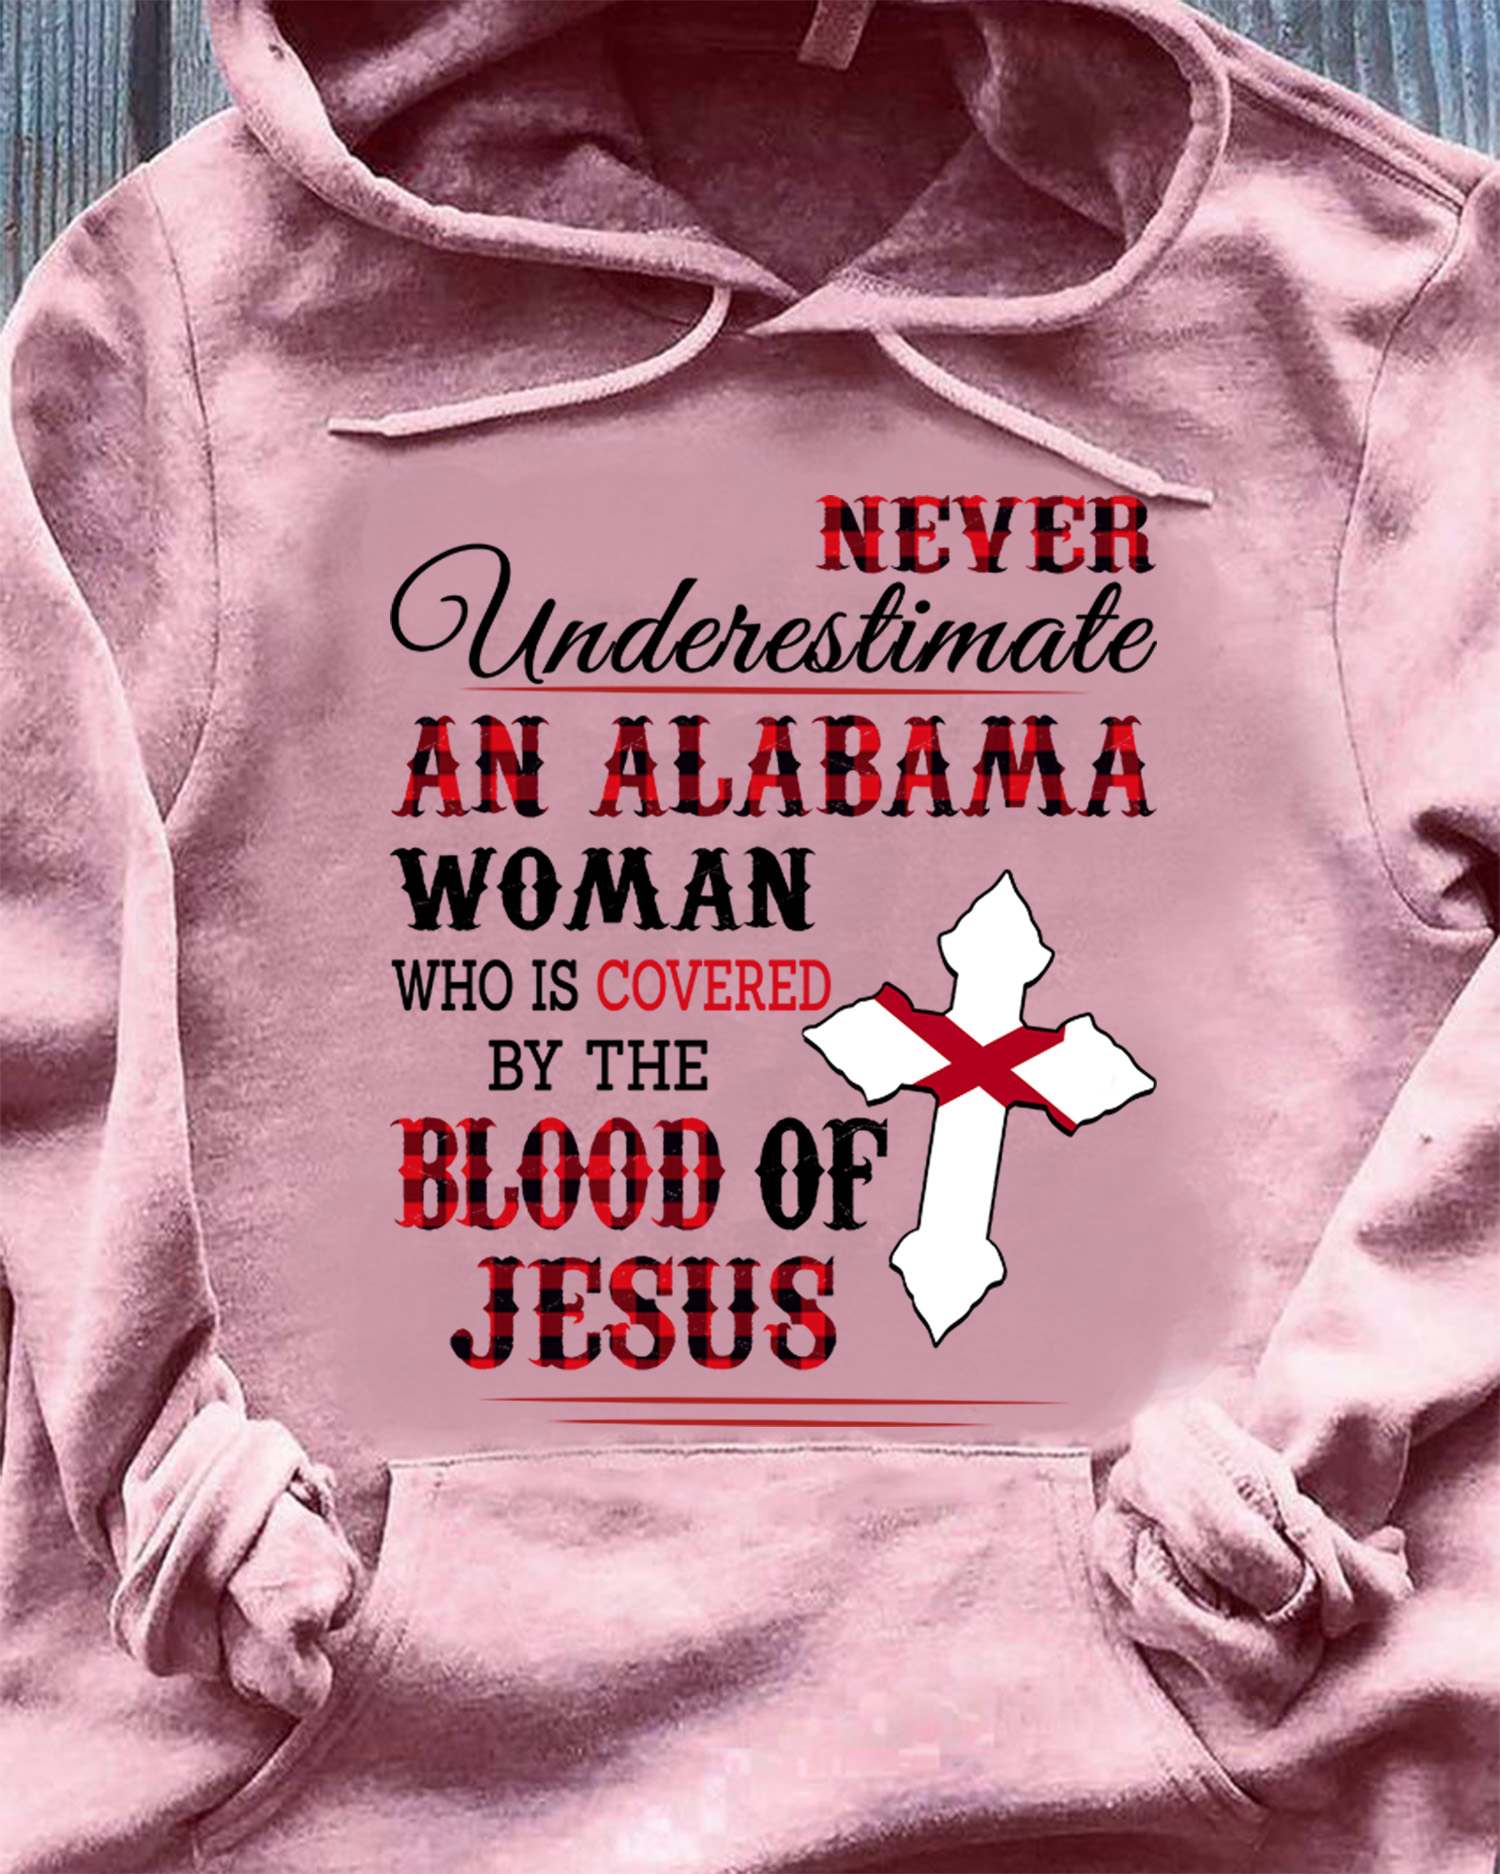 Never underestimate an Alabama woman who is covered by the blood of Jesus - Alabama US state